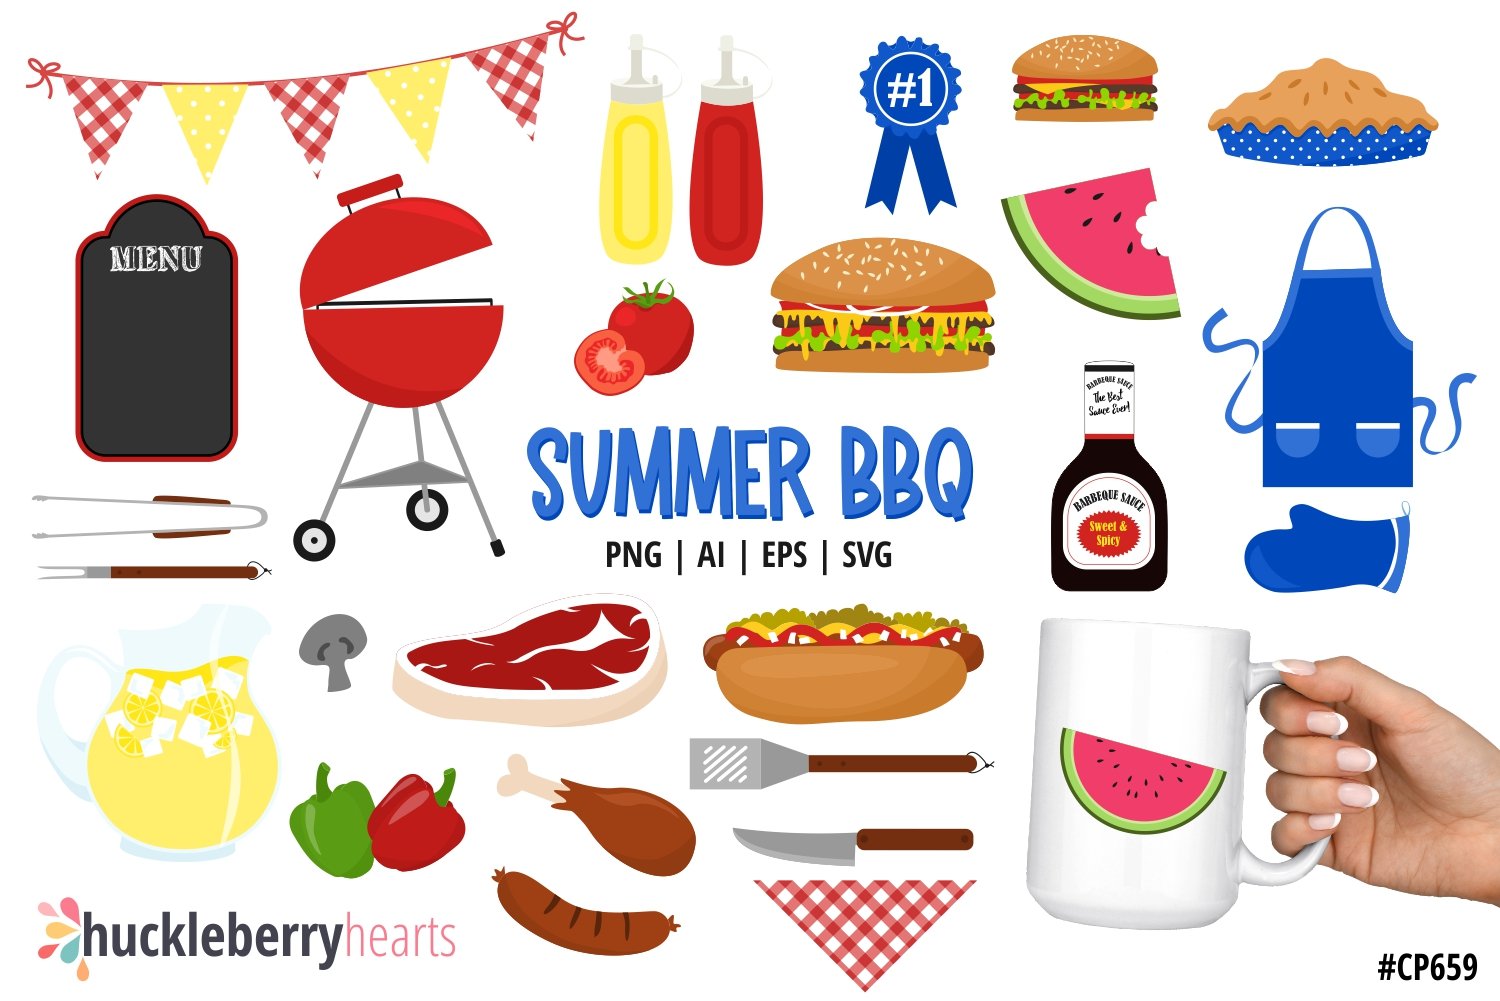 Summer BBQ Clipart cover image.